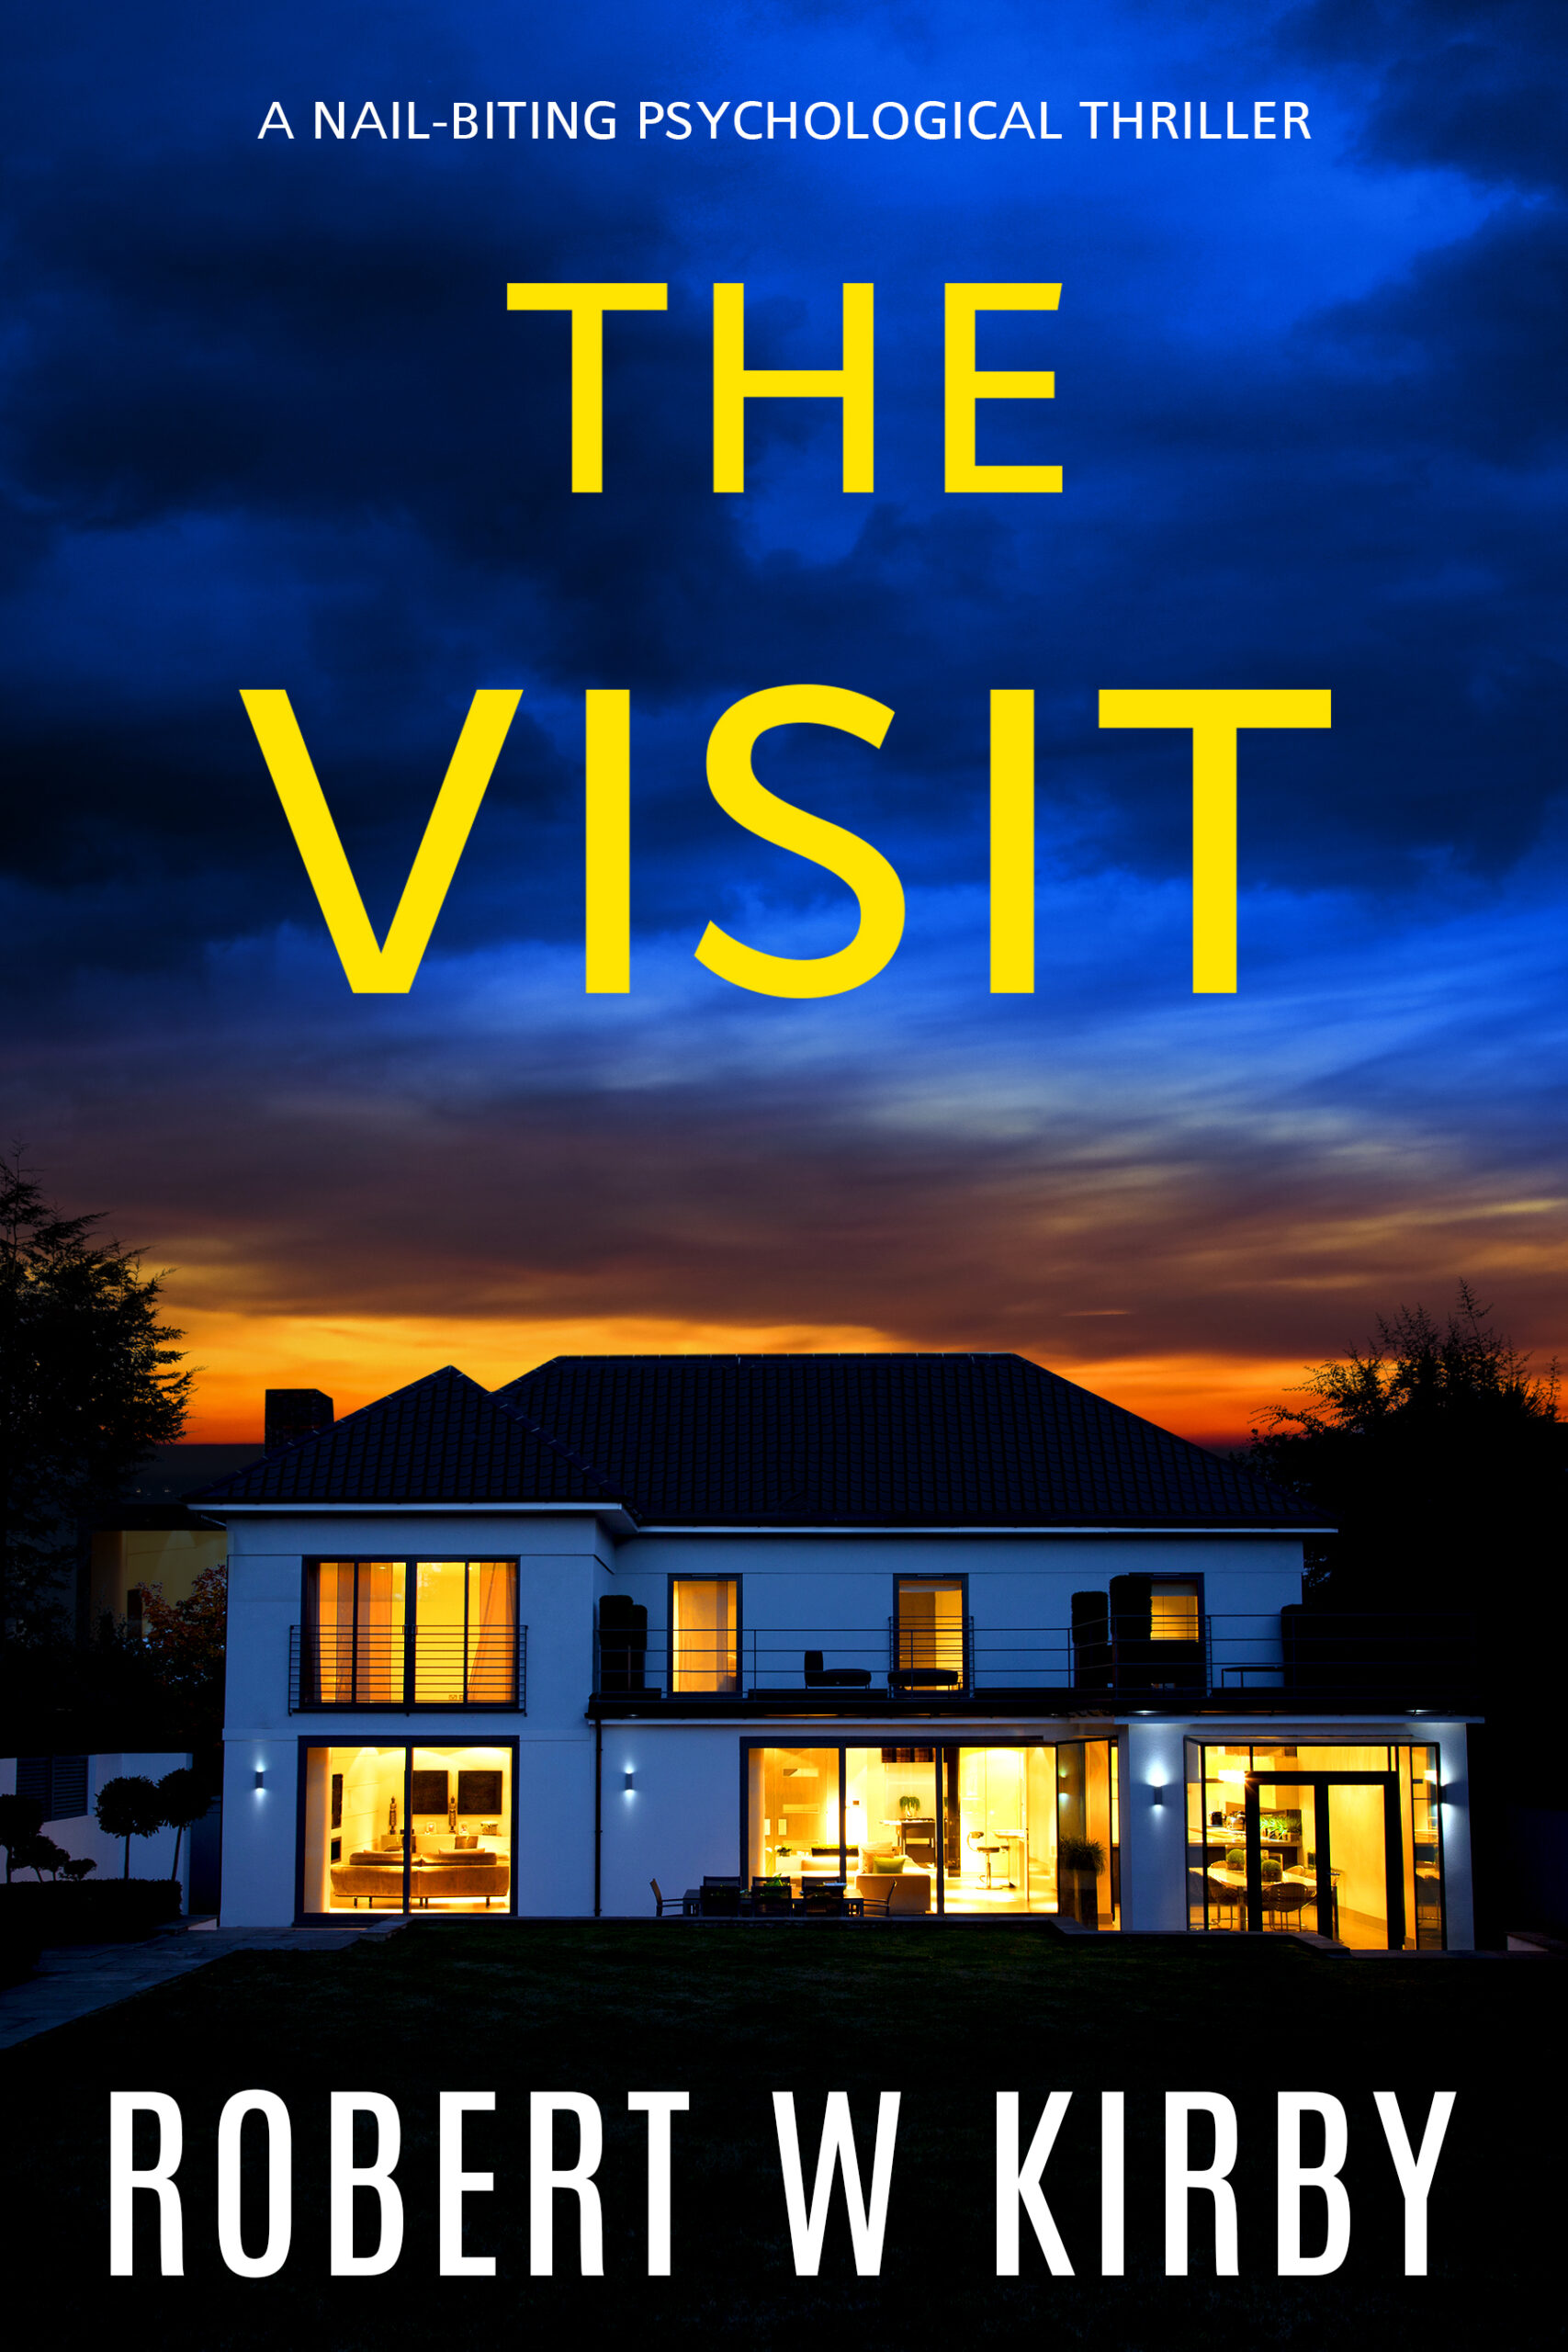 ROBERT W. KIRBY NEW RELEASE – THE VISIT